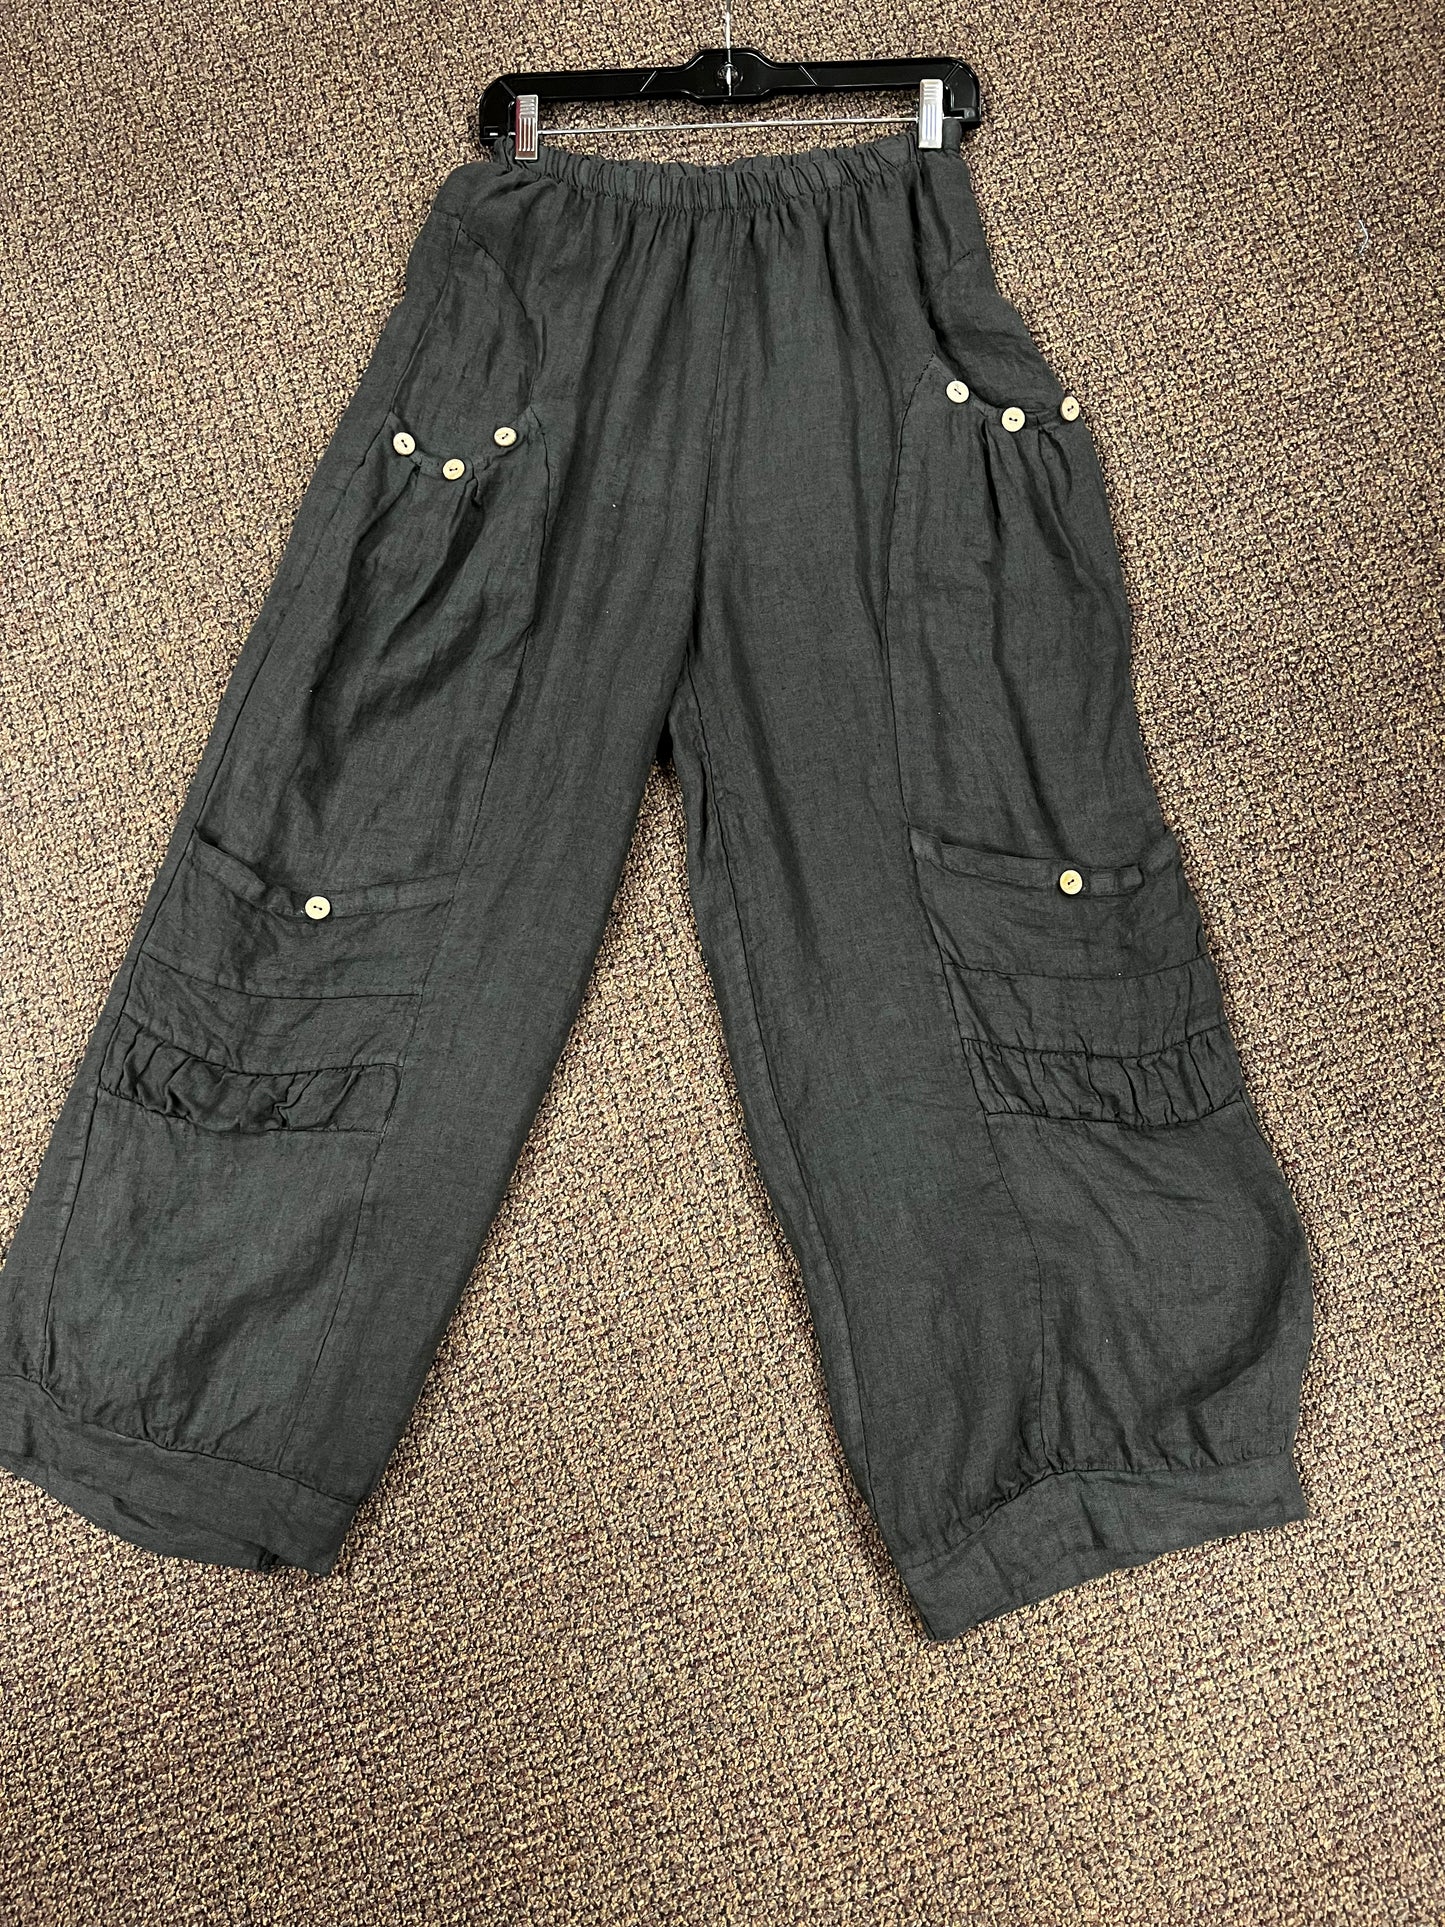 Four pocket Italian linen pants with button accent.